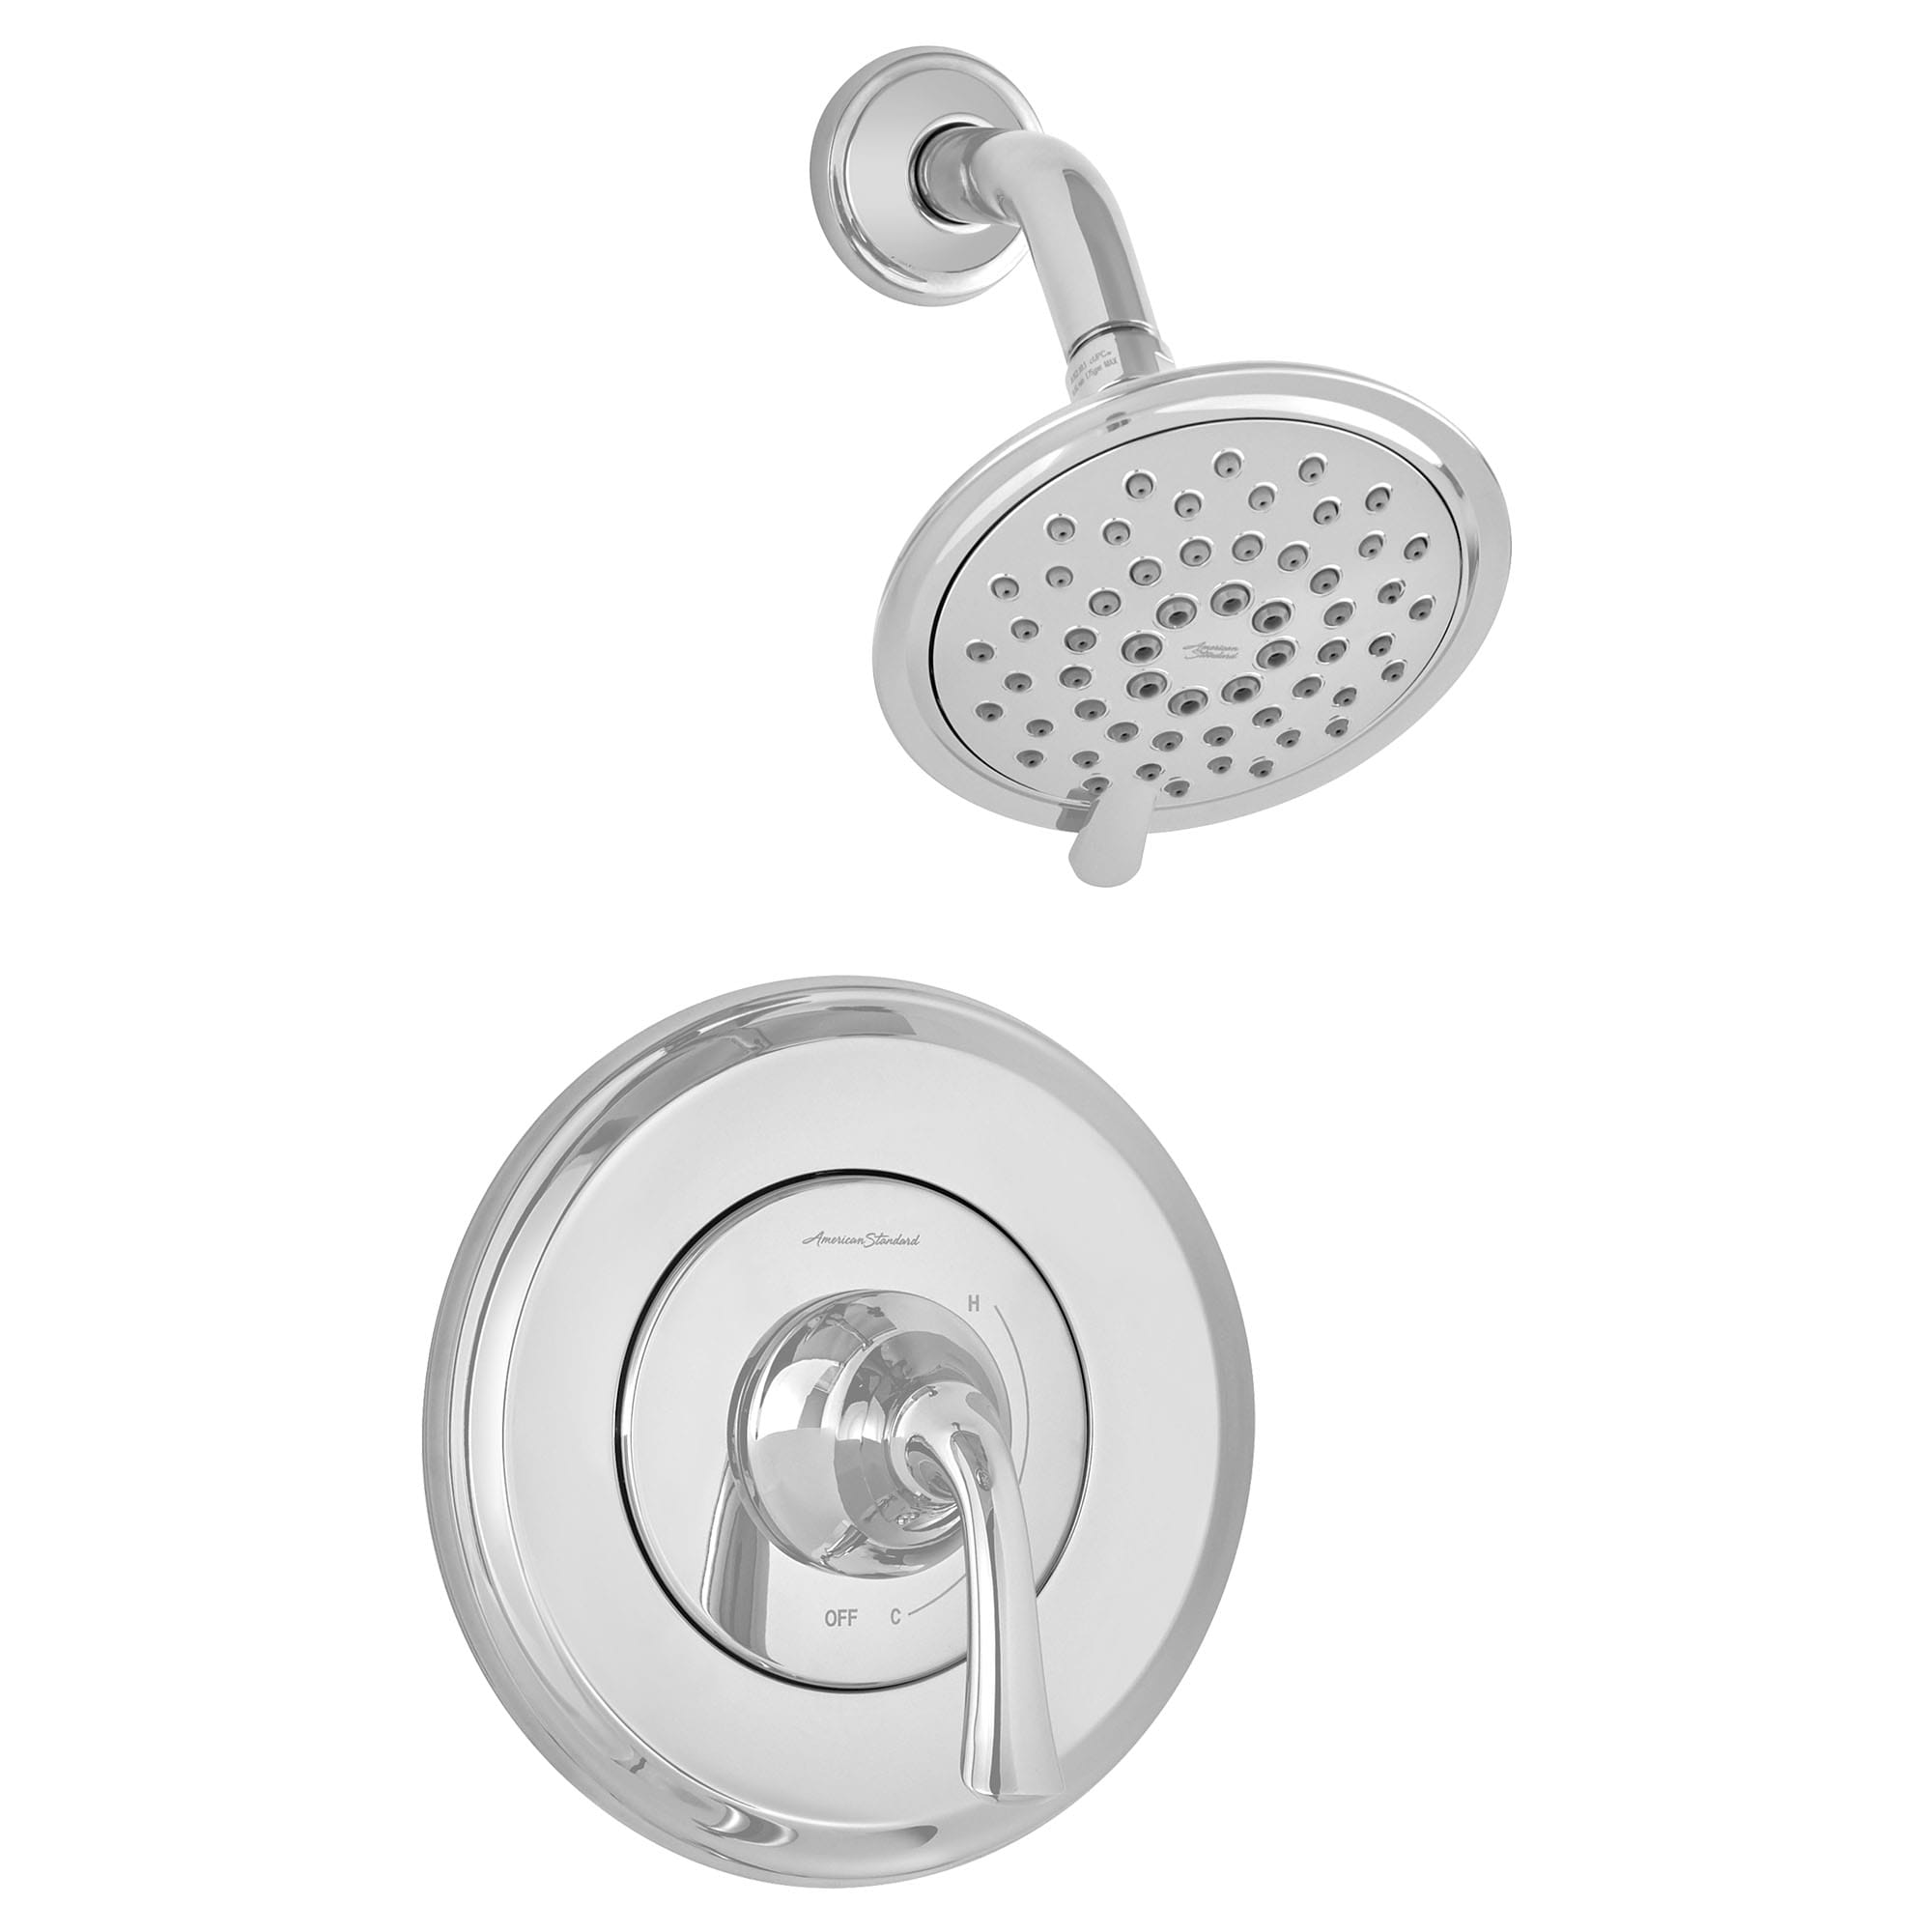 Patience 18 gpm 66 L min Shower Trim Kit With Water Saving 3 Function Showerhead Double Ceramic Pressure Balance Cartridge With Lever Handle CHROME